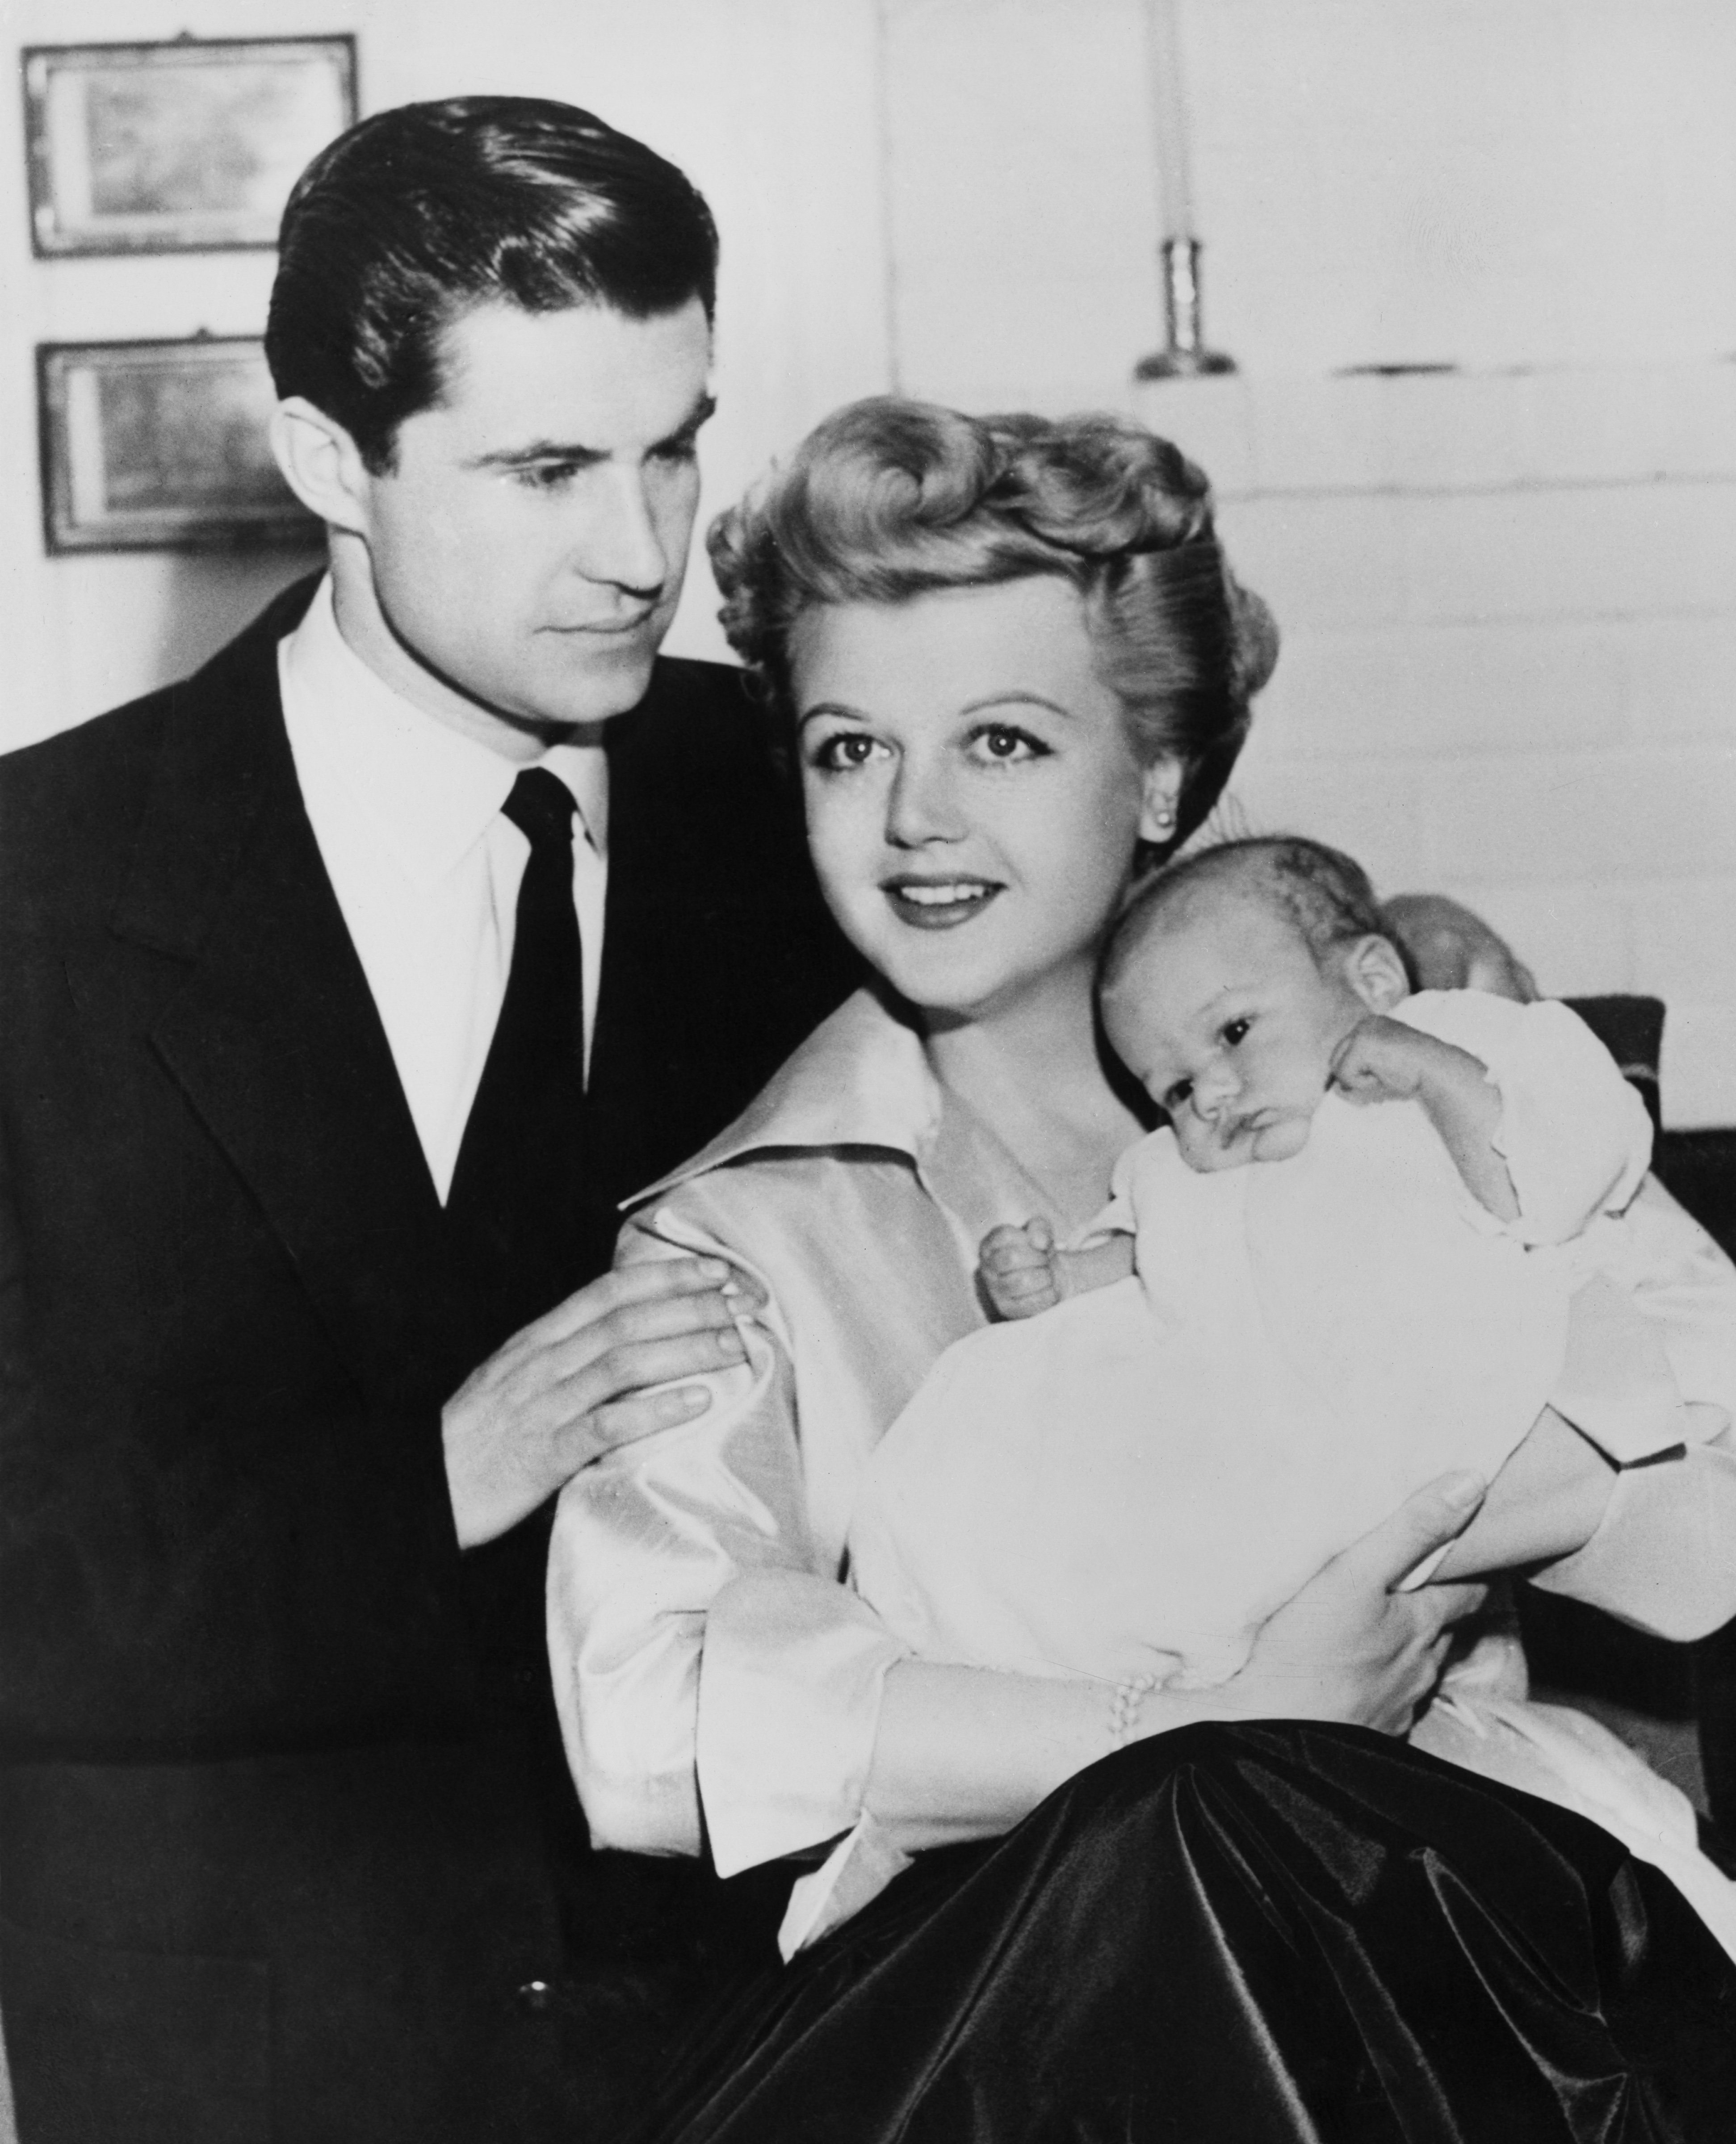 Angela Lansbury, Peter Shaw, and their three-month-old son Anthony Peter Shaw at their home in Hollywood, California, in 1952 | Source: Getty Images